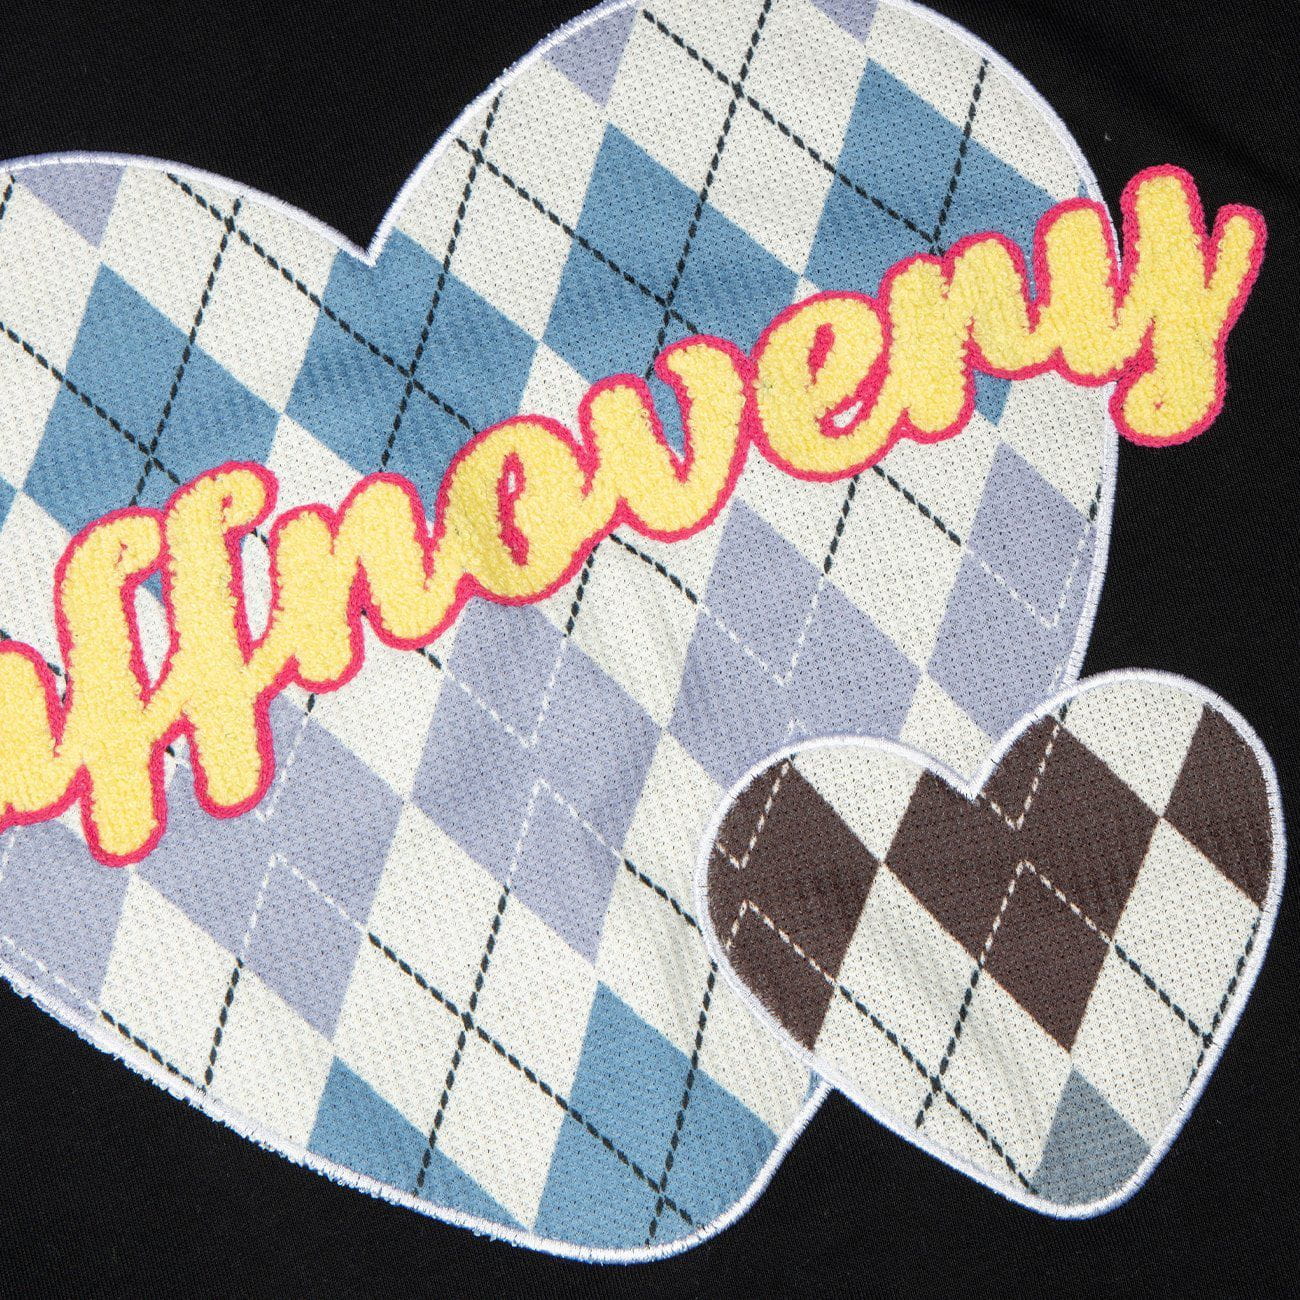 LUXENFY™ - Love Plaid Patch Sweatshirt luxenfy.com